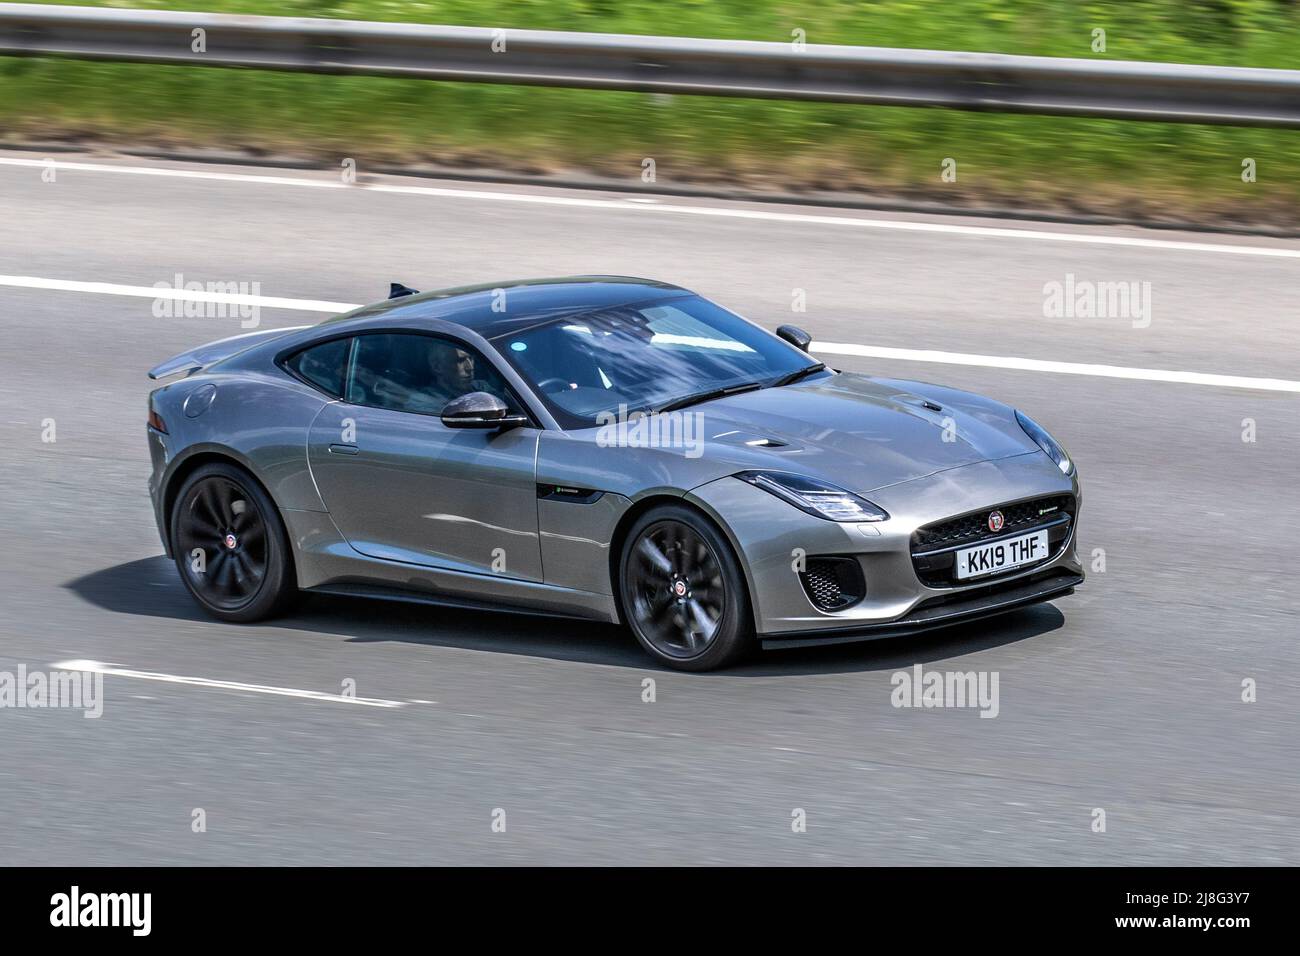 2019 silver Jaguar F-TYPE V6 R-DYNAMIC AWD 2995cc petrol 8-speed automatic 2dr coupe Stock Photo